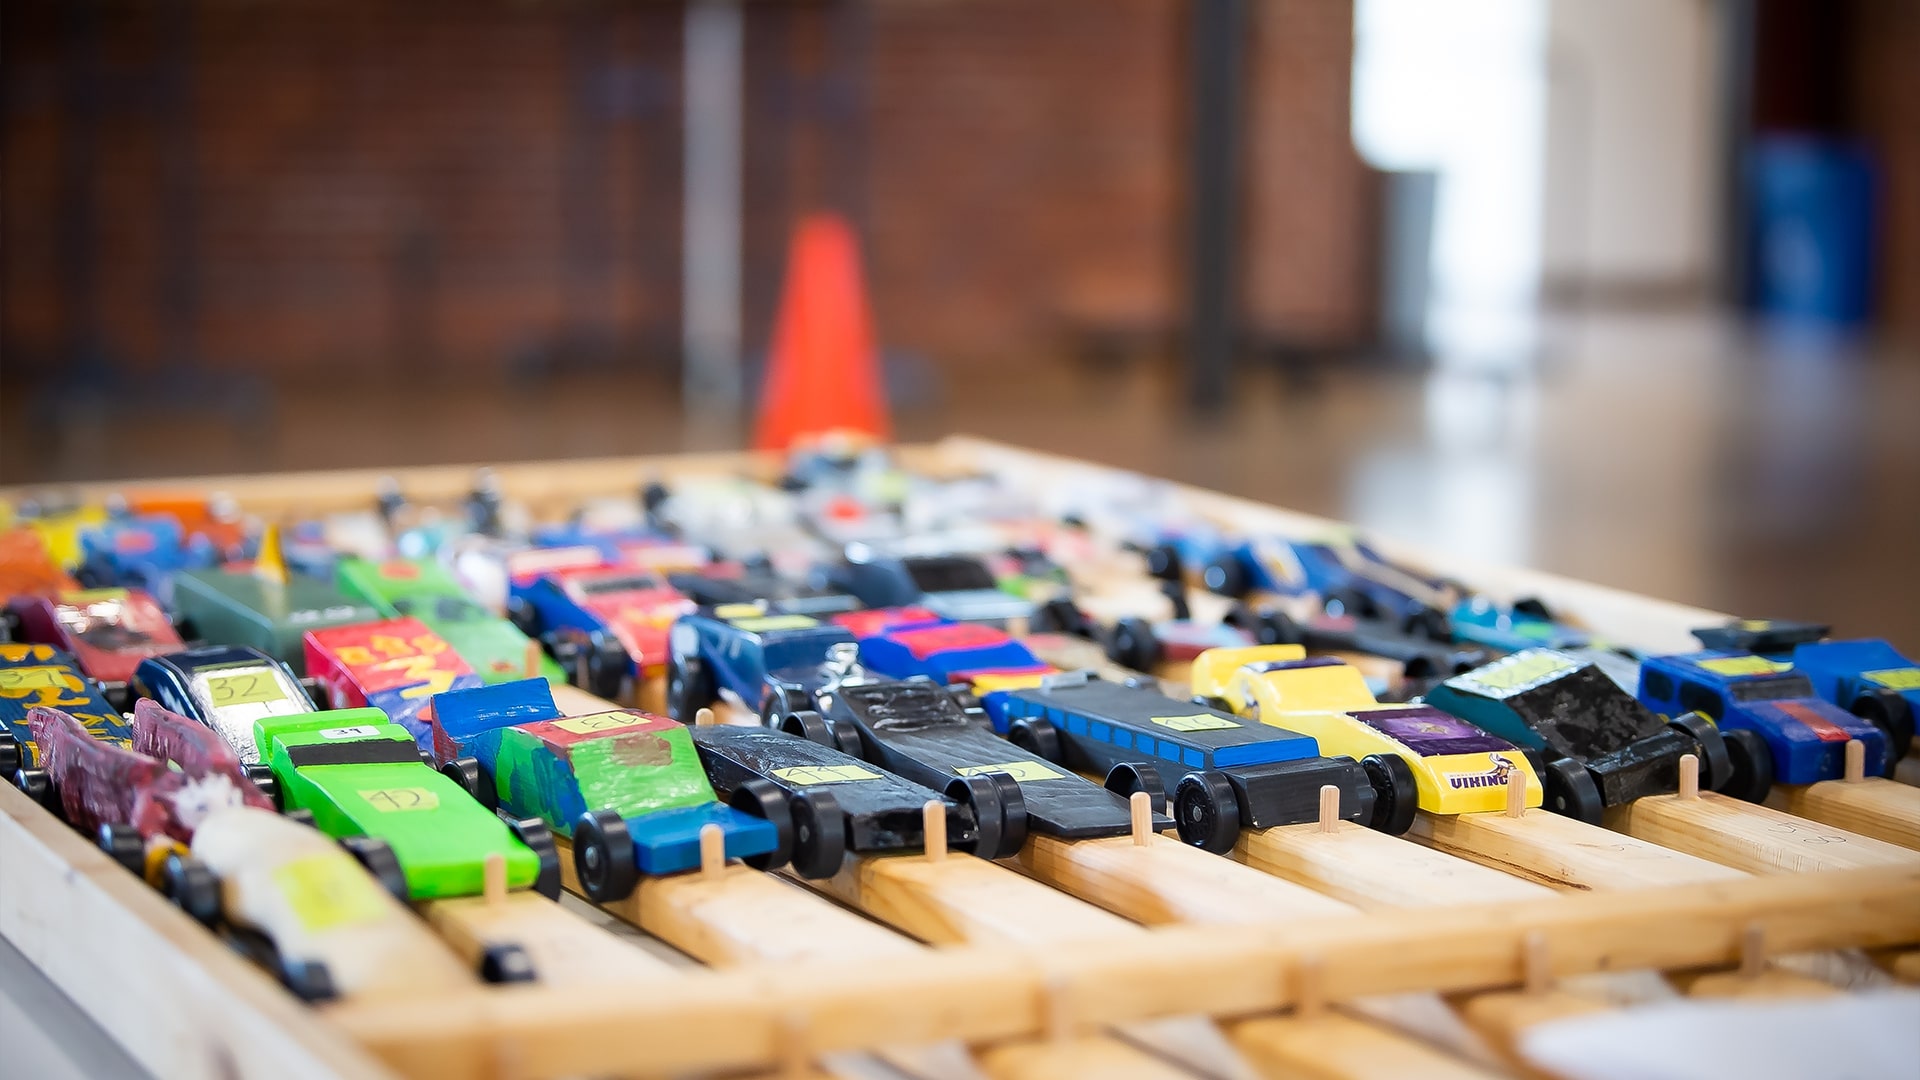 Thirty or so Pinewood Derby cars or all different colors, shapes, and designs are lined up waiting for their turn to race.